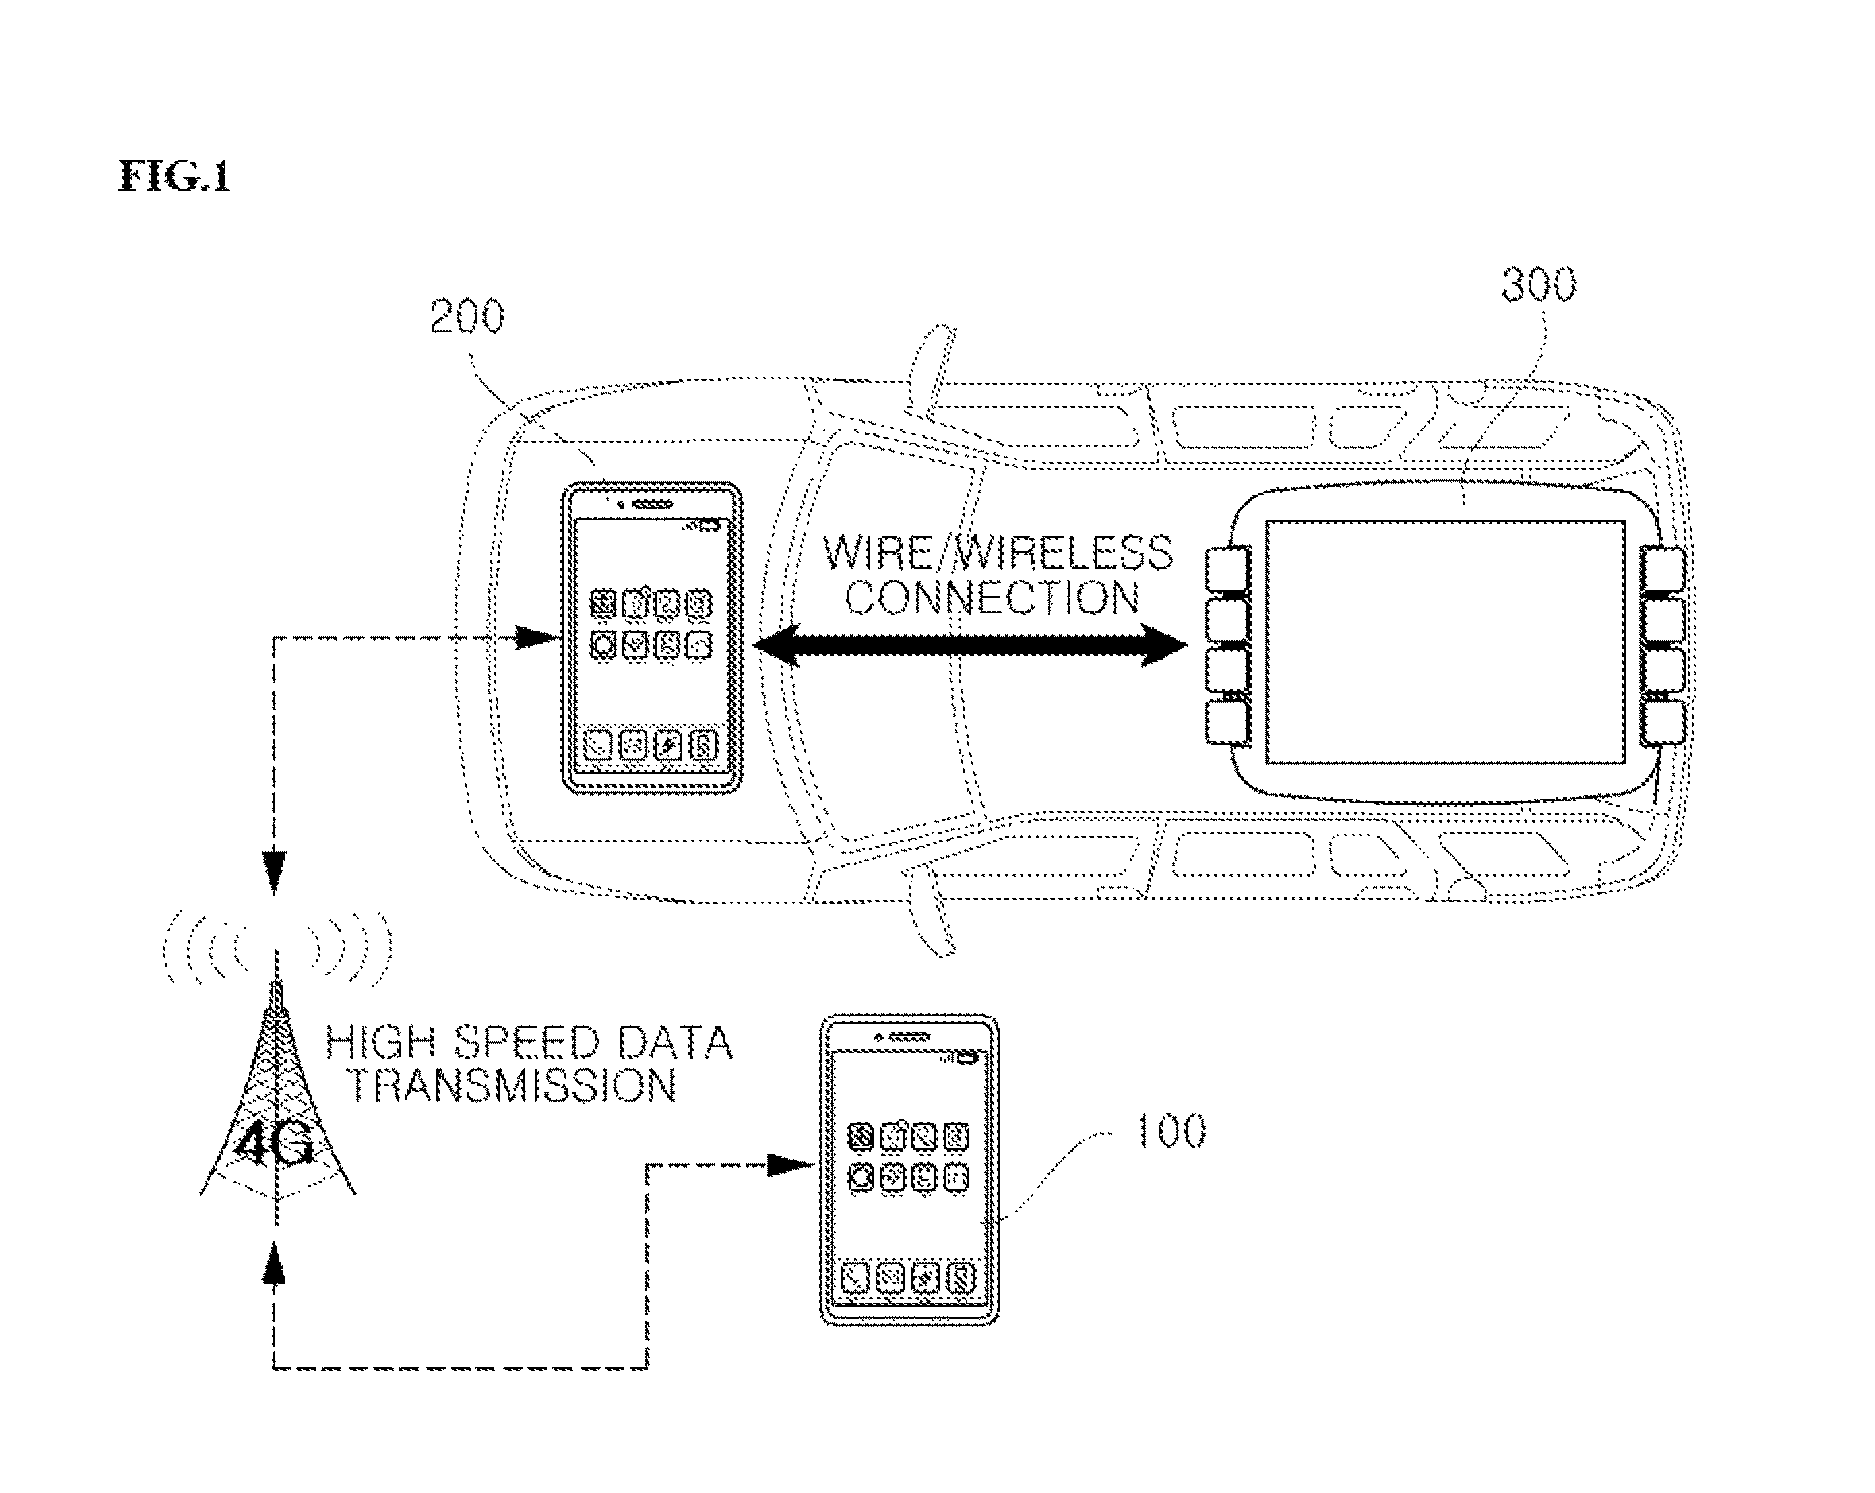 Interlocking system between content player devices